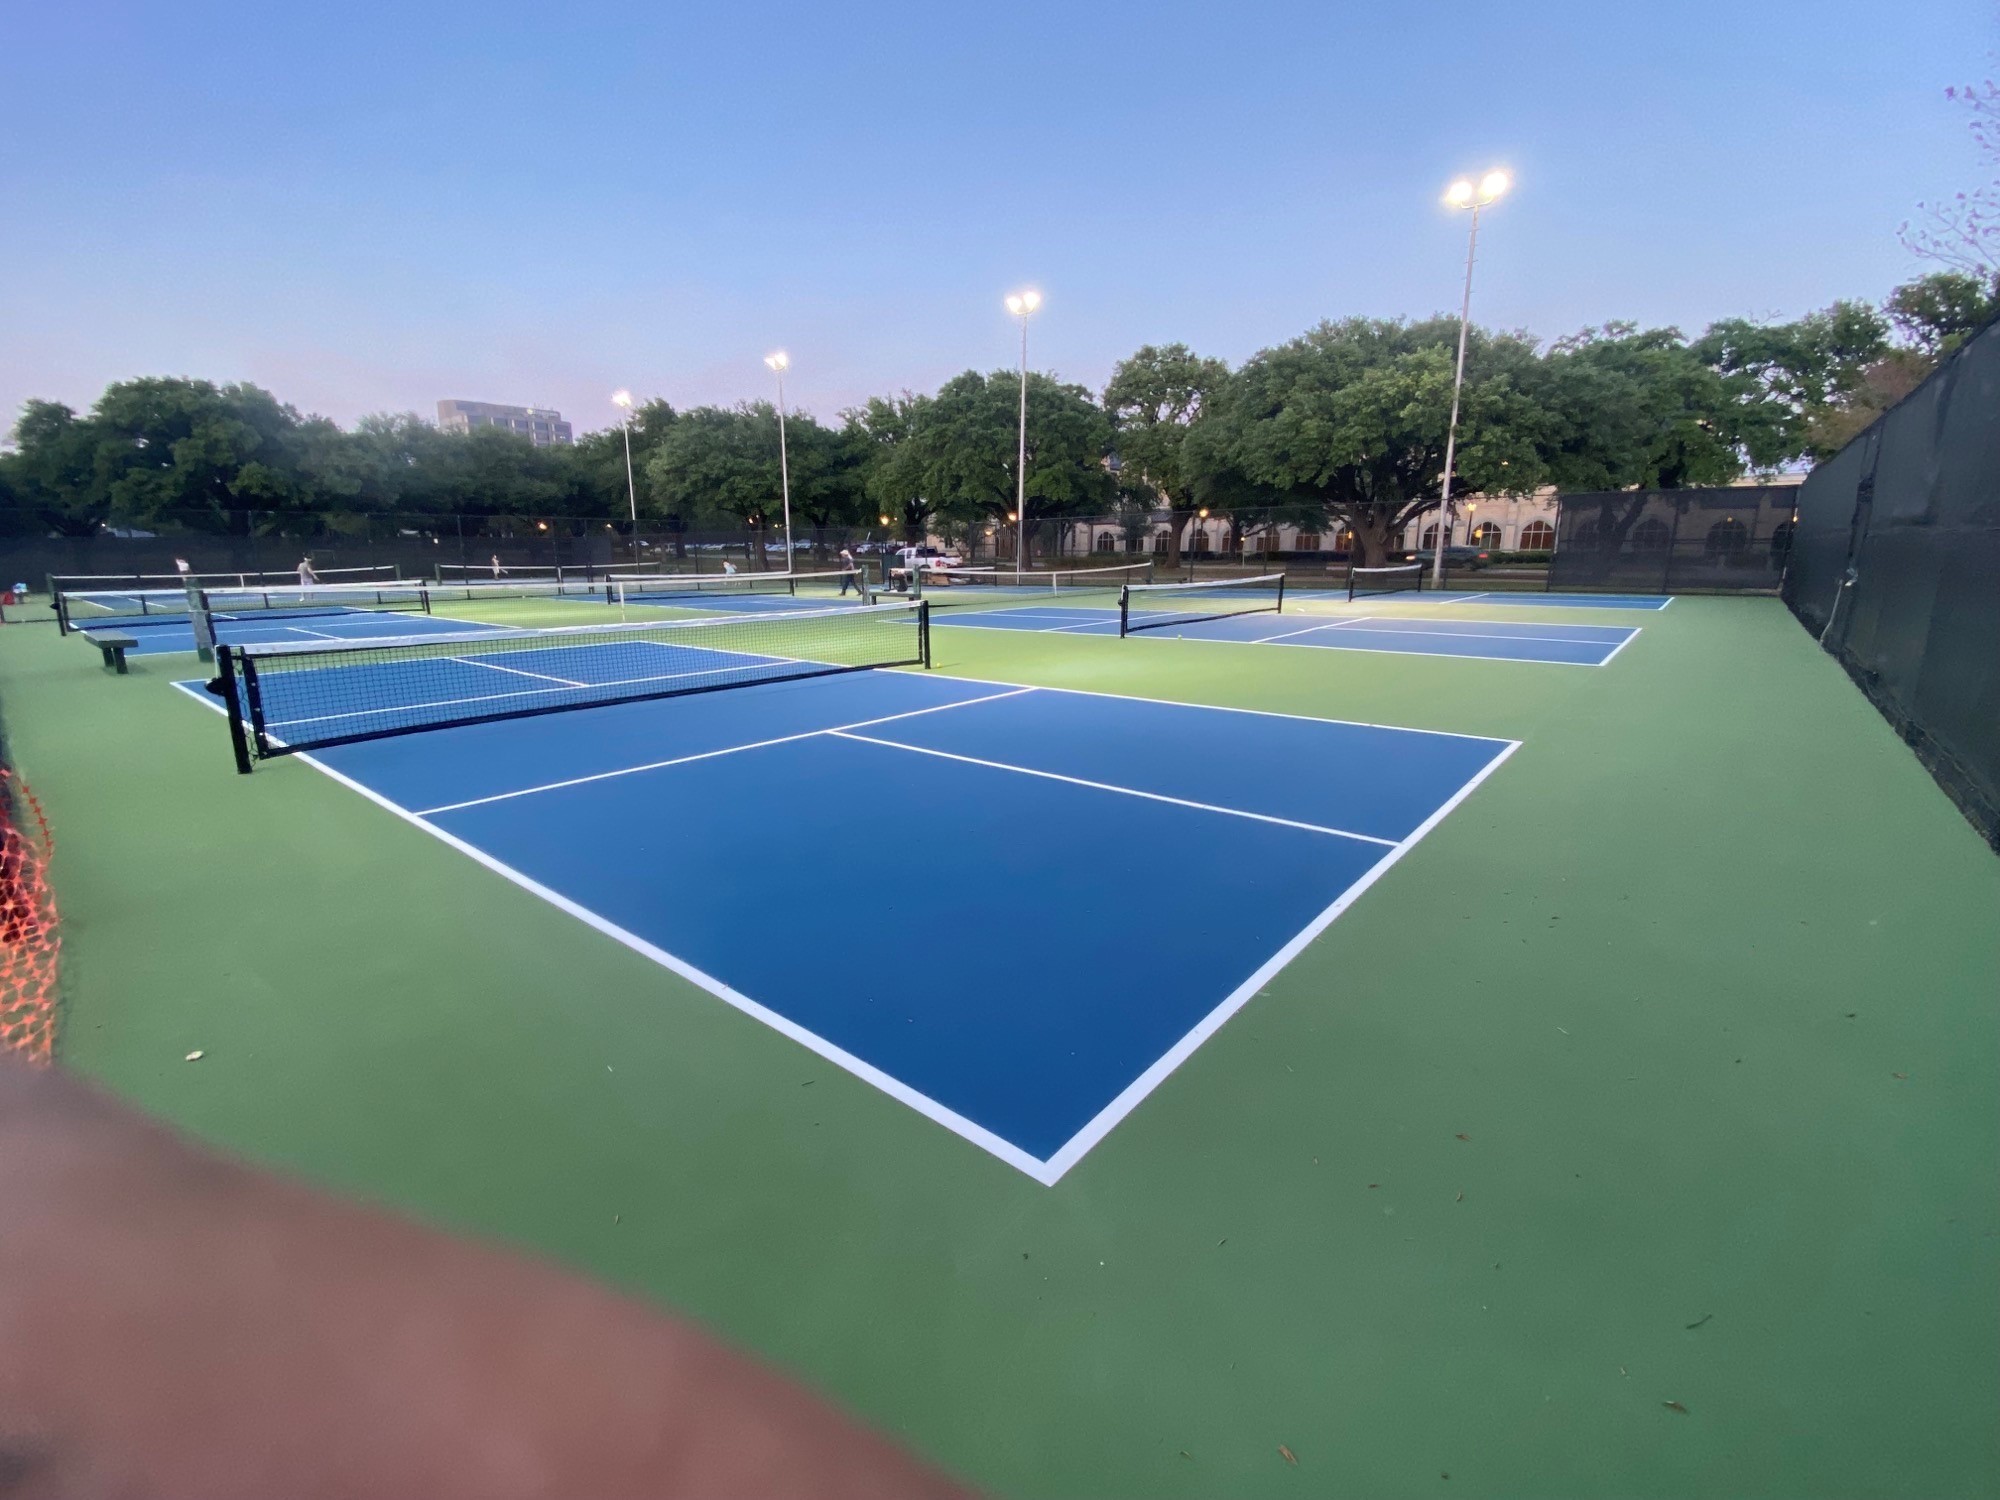 10 Best Places to Play Pickleball in Dallas-Fort Worth | Dallas Observer